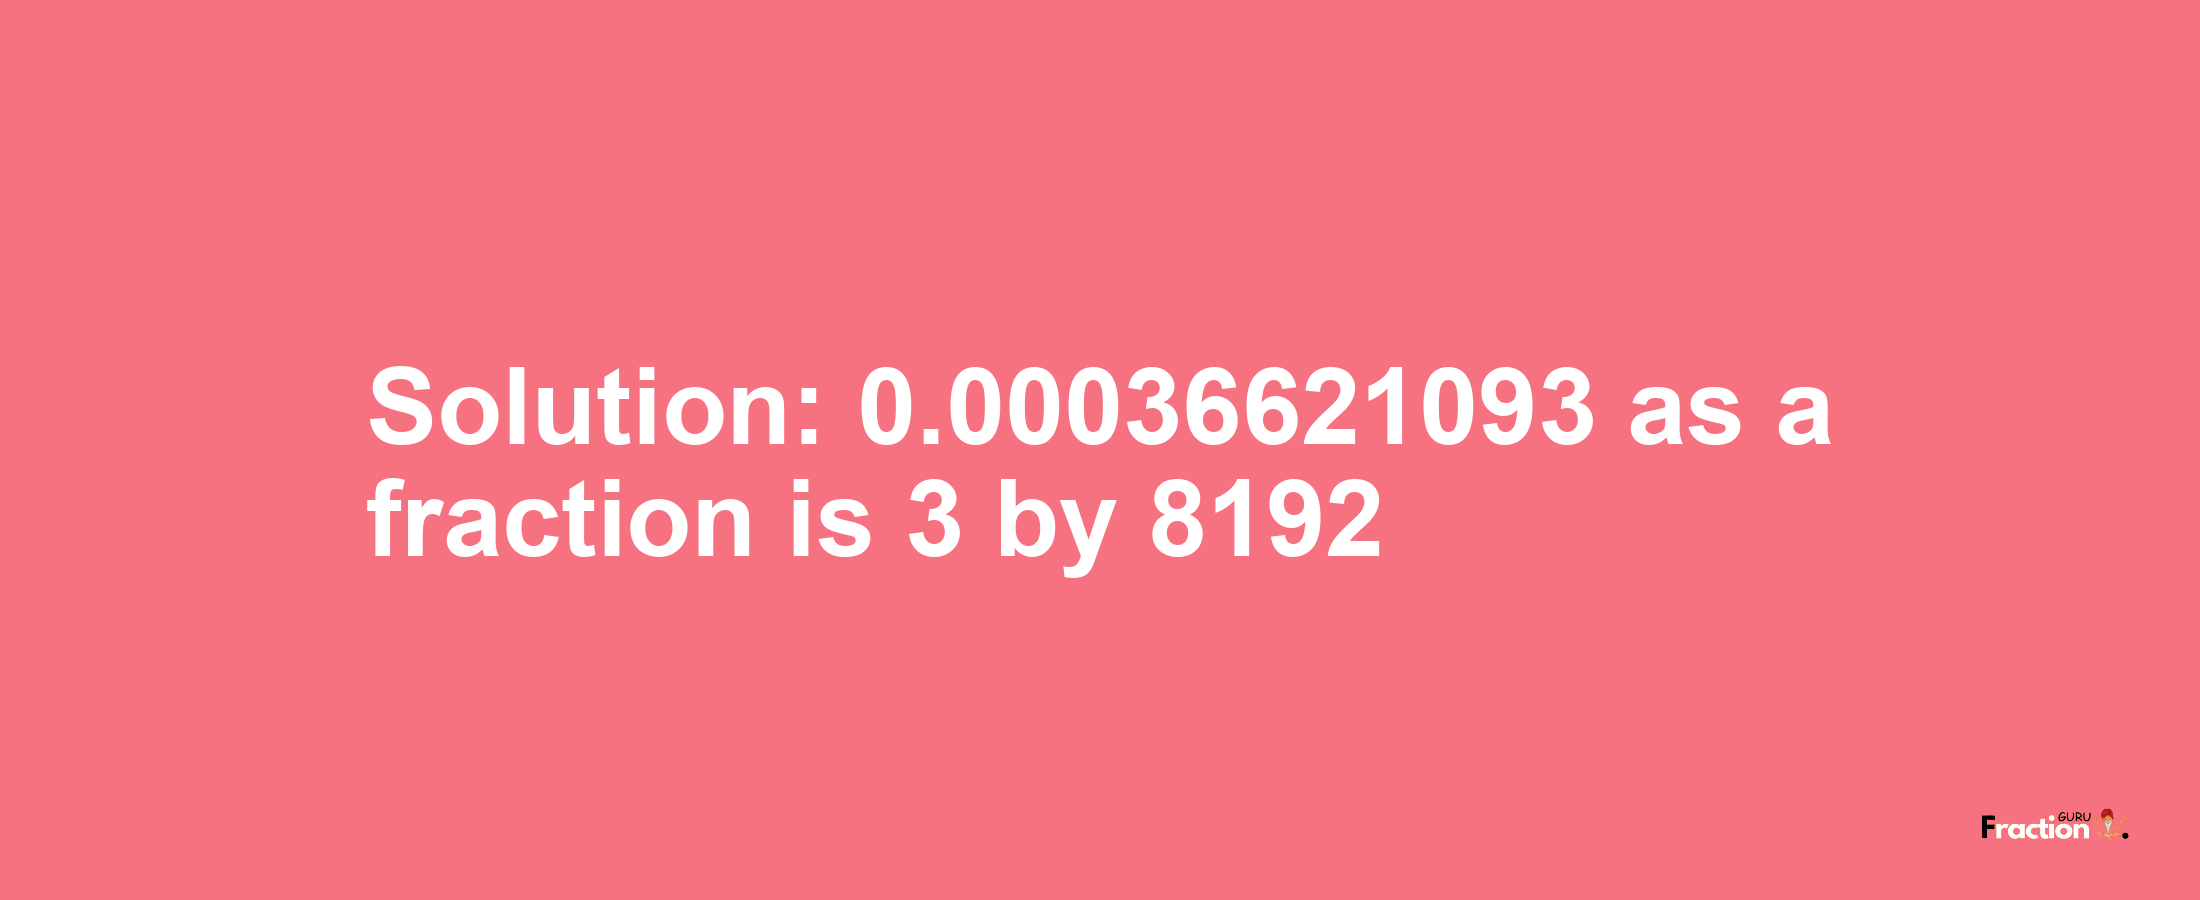 Solution:0.00036621093 as a fraction is 3/8192